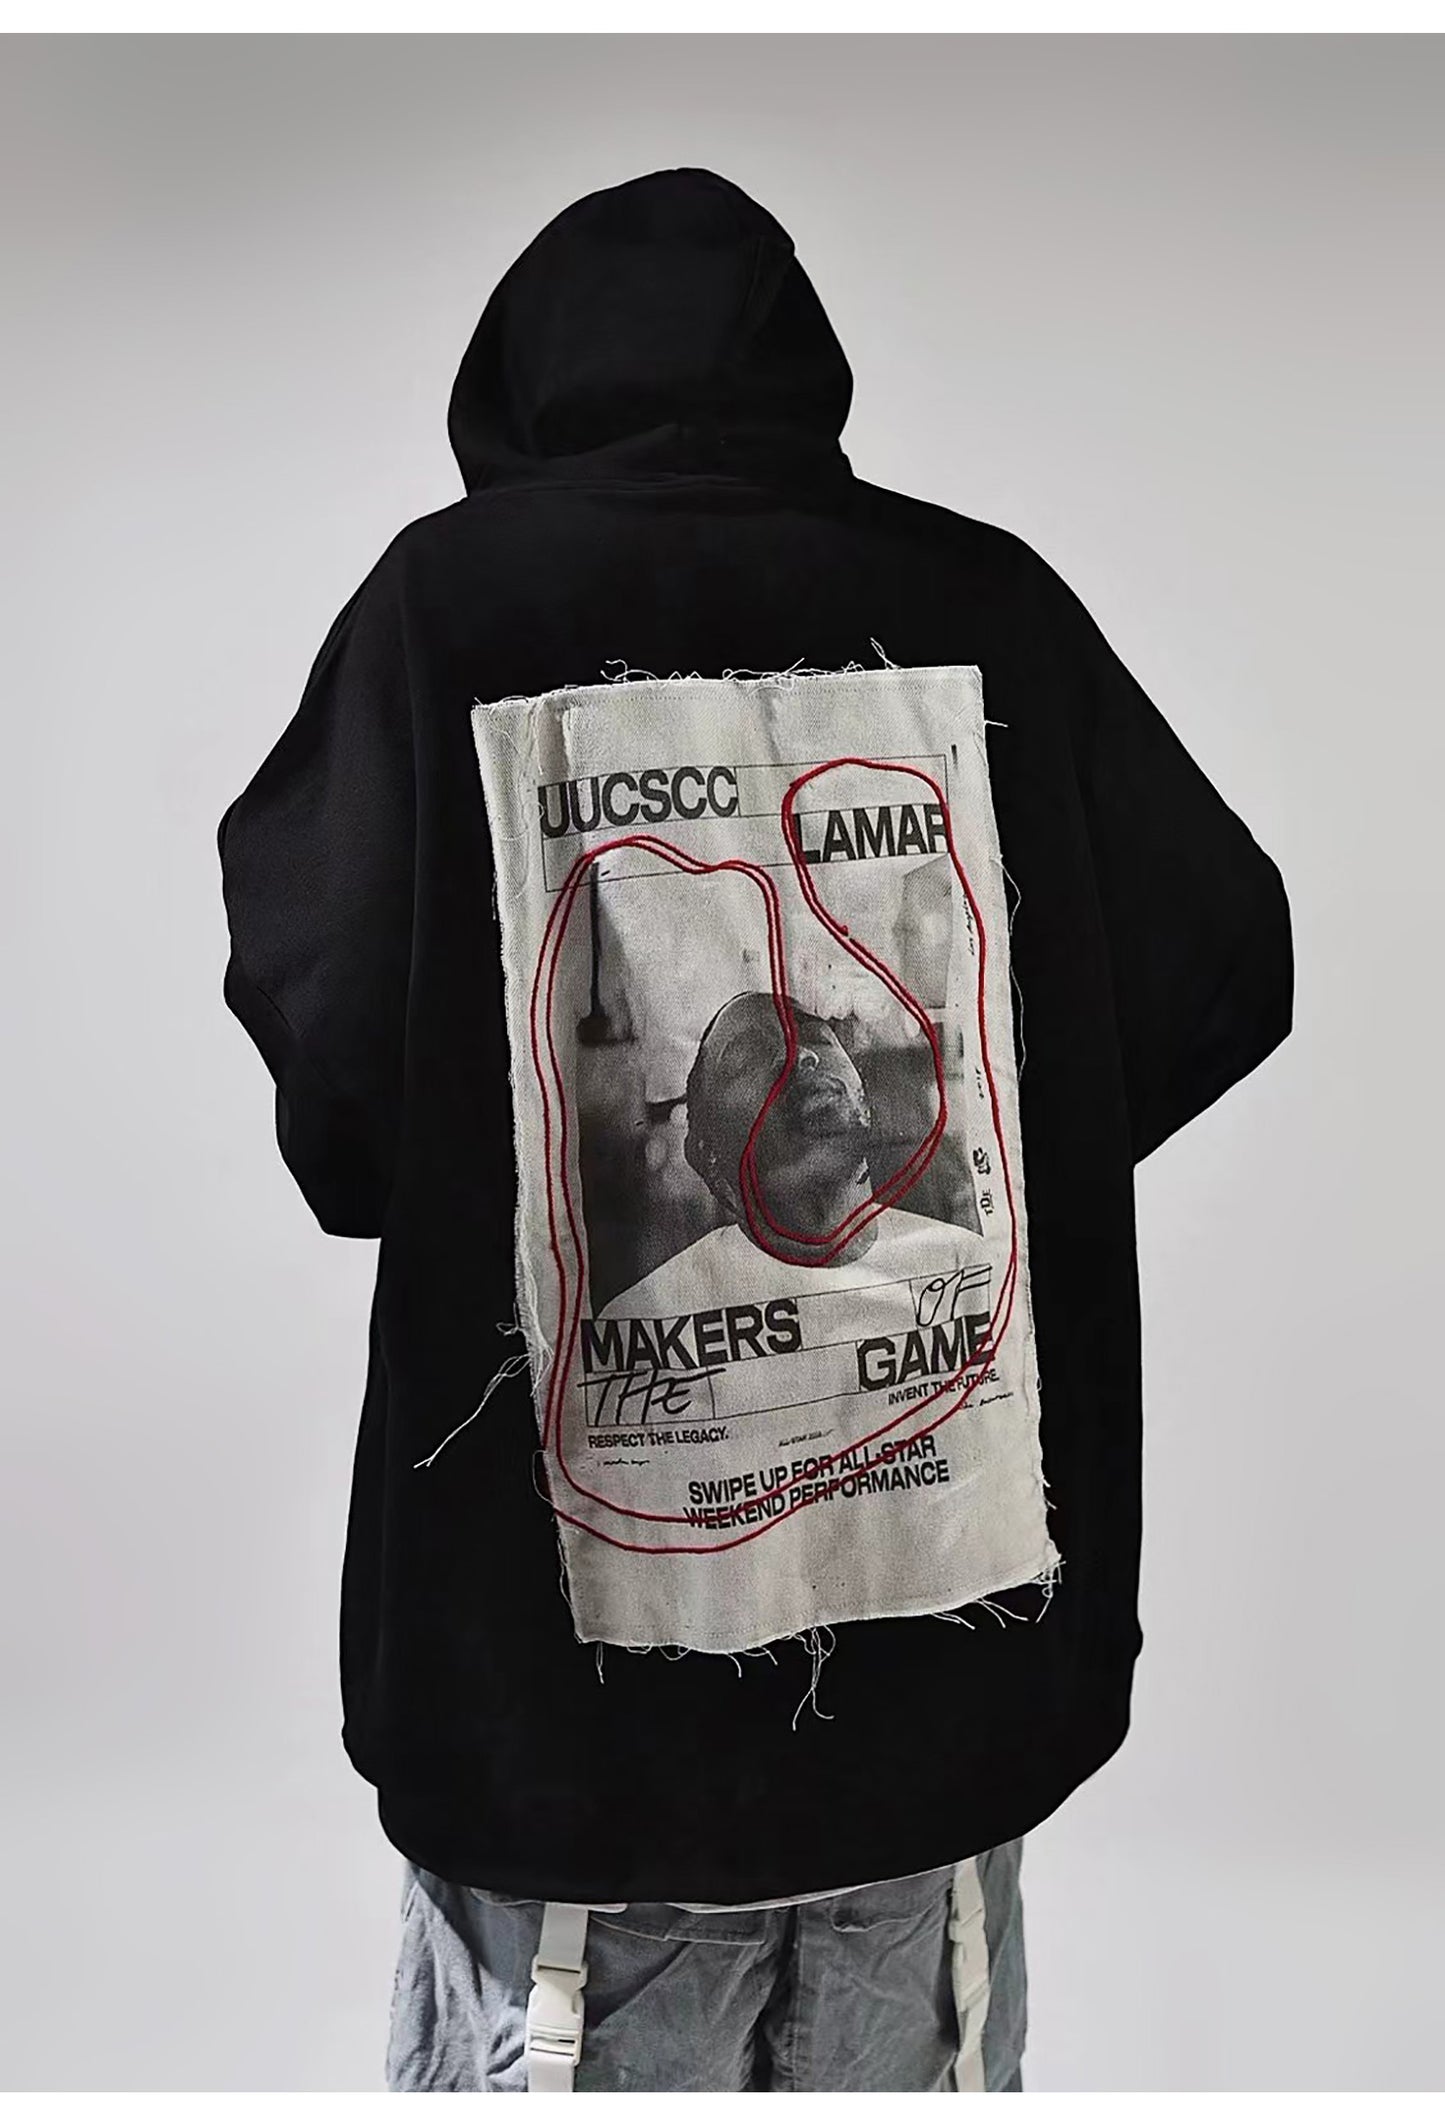 Makers of The Game  Hoodie